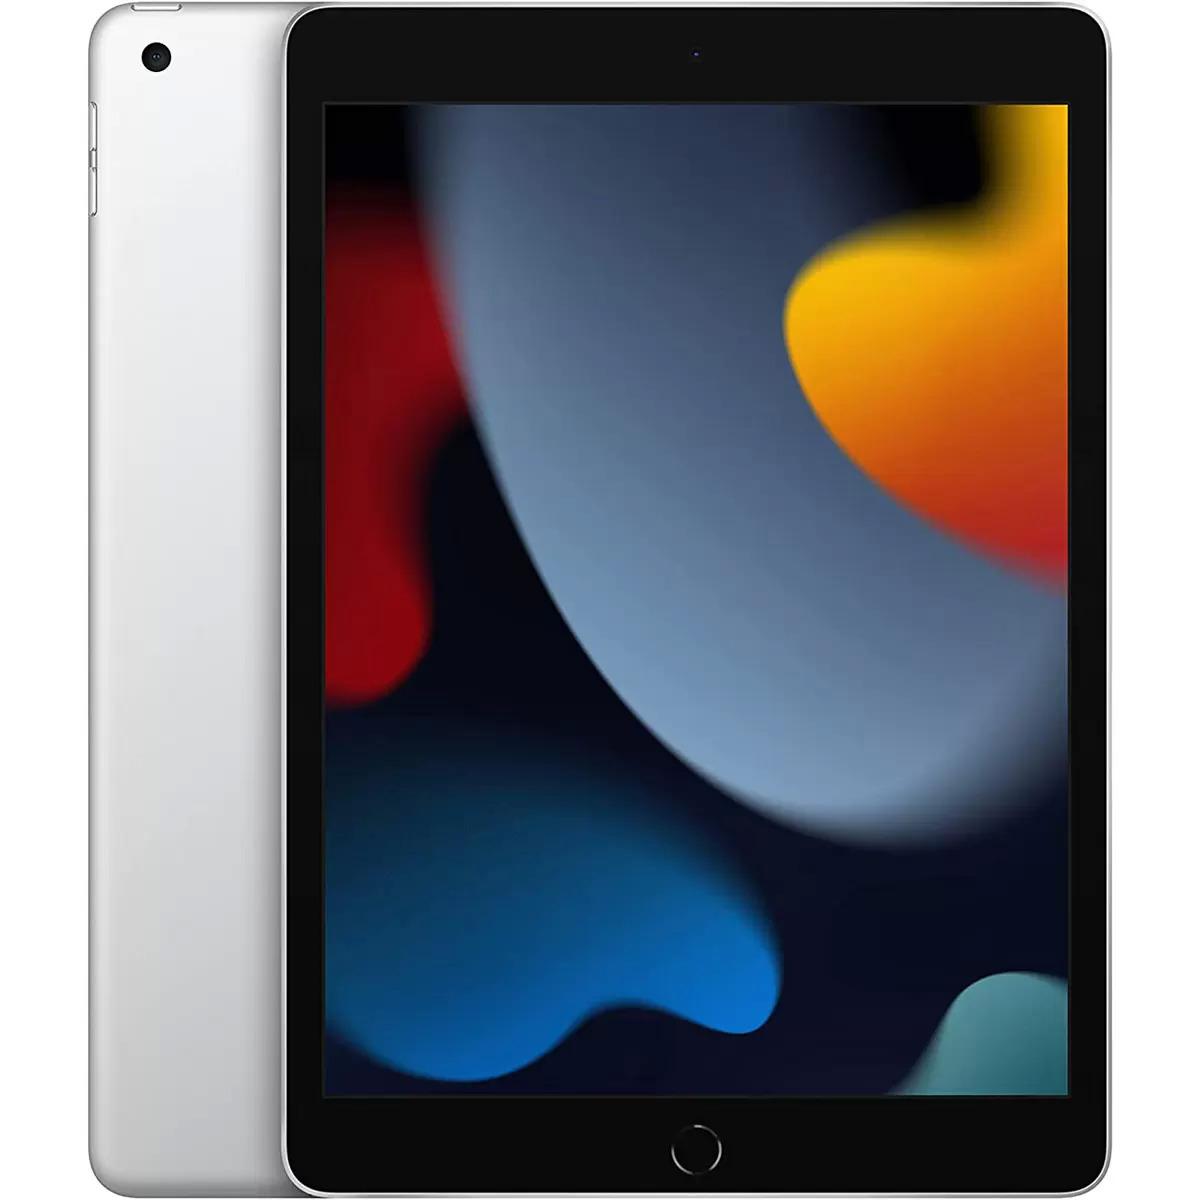 Apple iPad 10.2in 64GB Wifi Tablet for Military Veterans for $259 Shipped